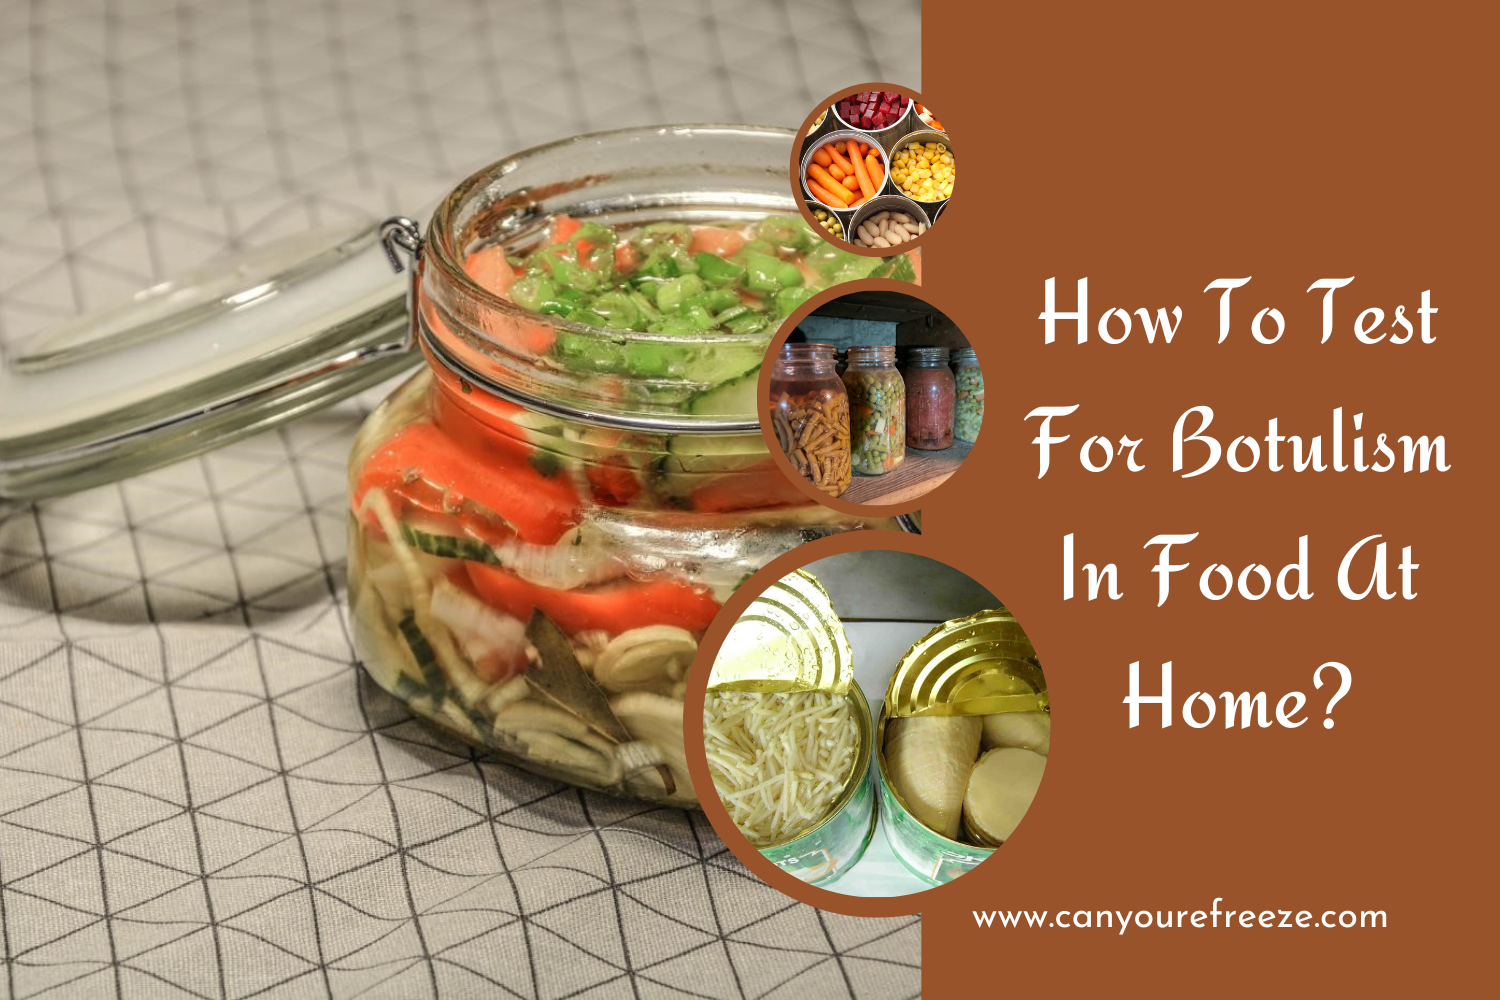 How To Test For Botulism In Food At Home